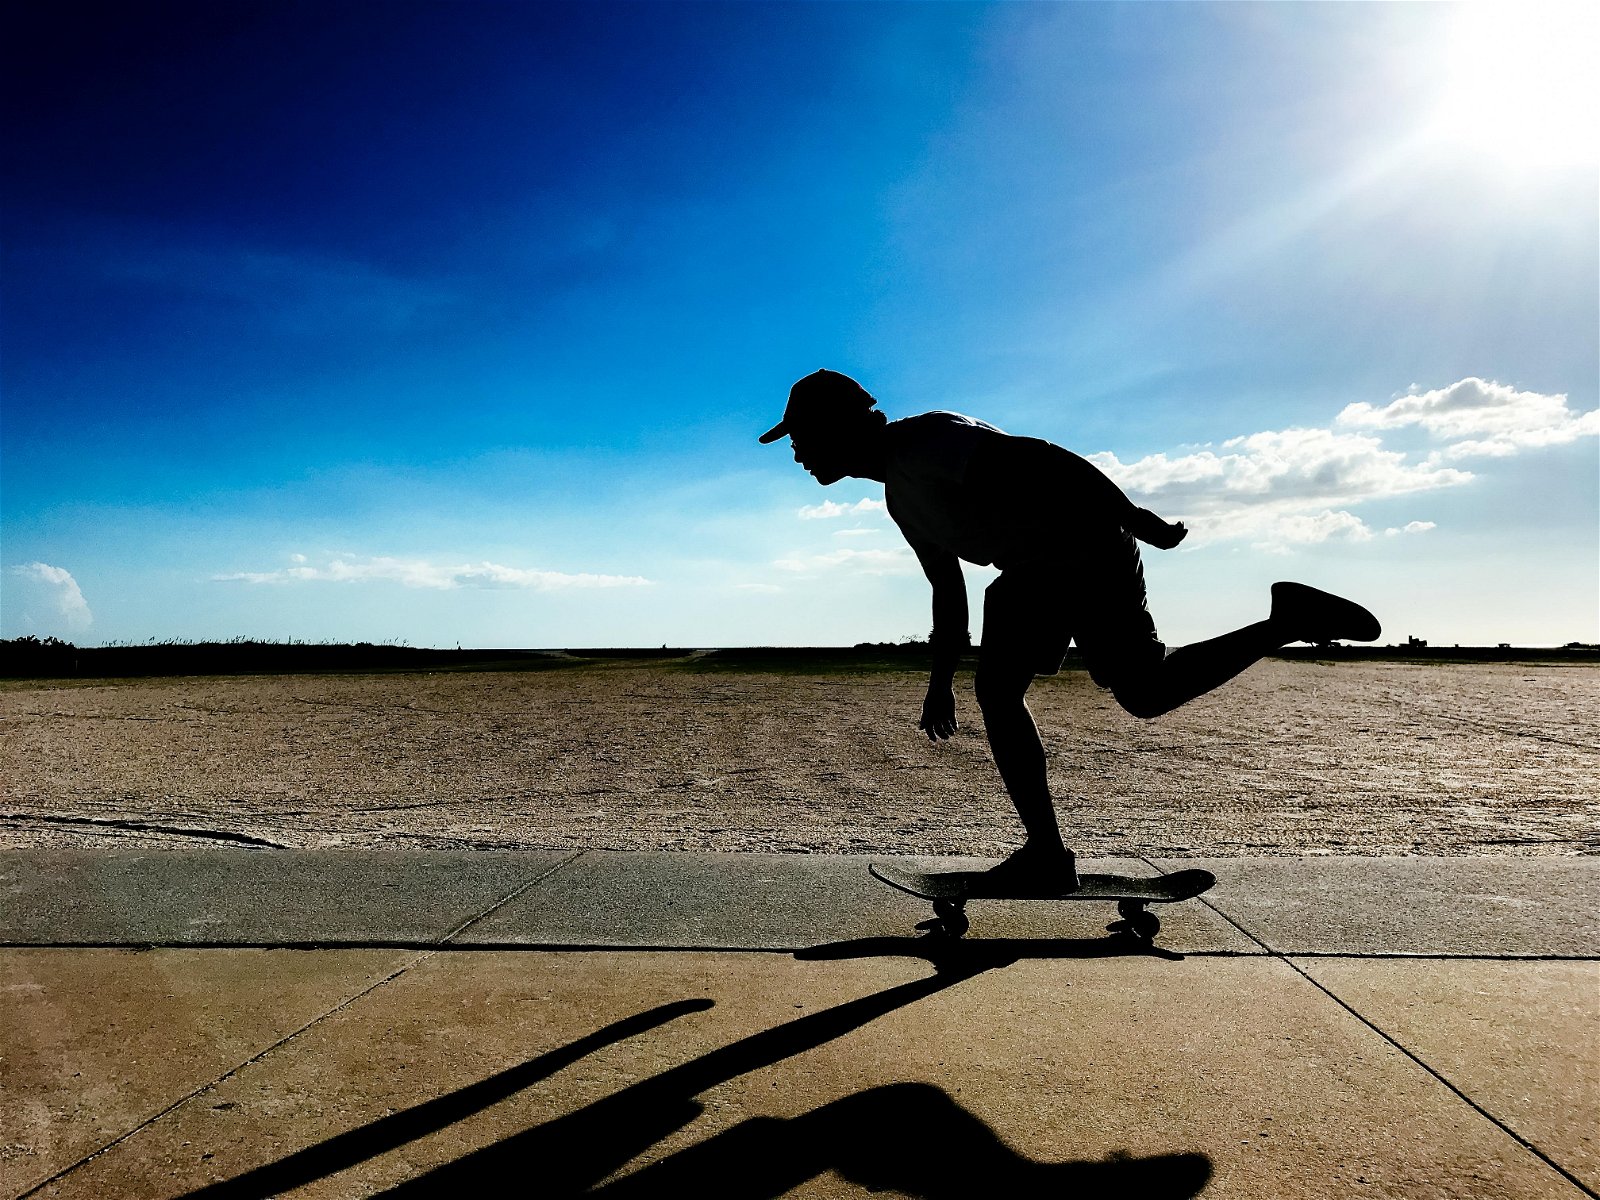 Silhouette of a skateboarder ridiing down a sidewalk as an example of iPhone burst for sports photography